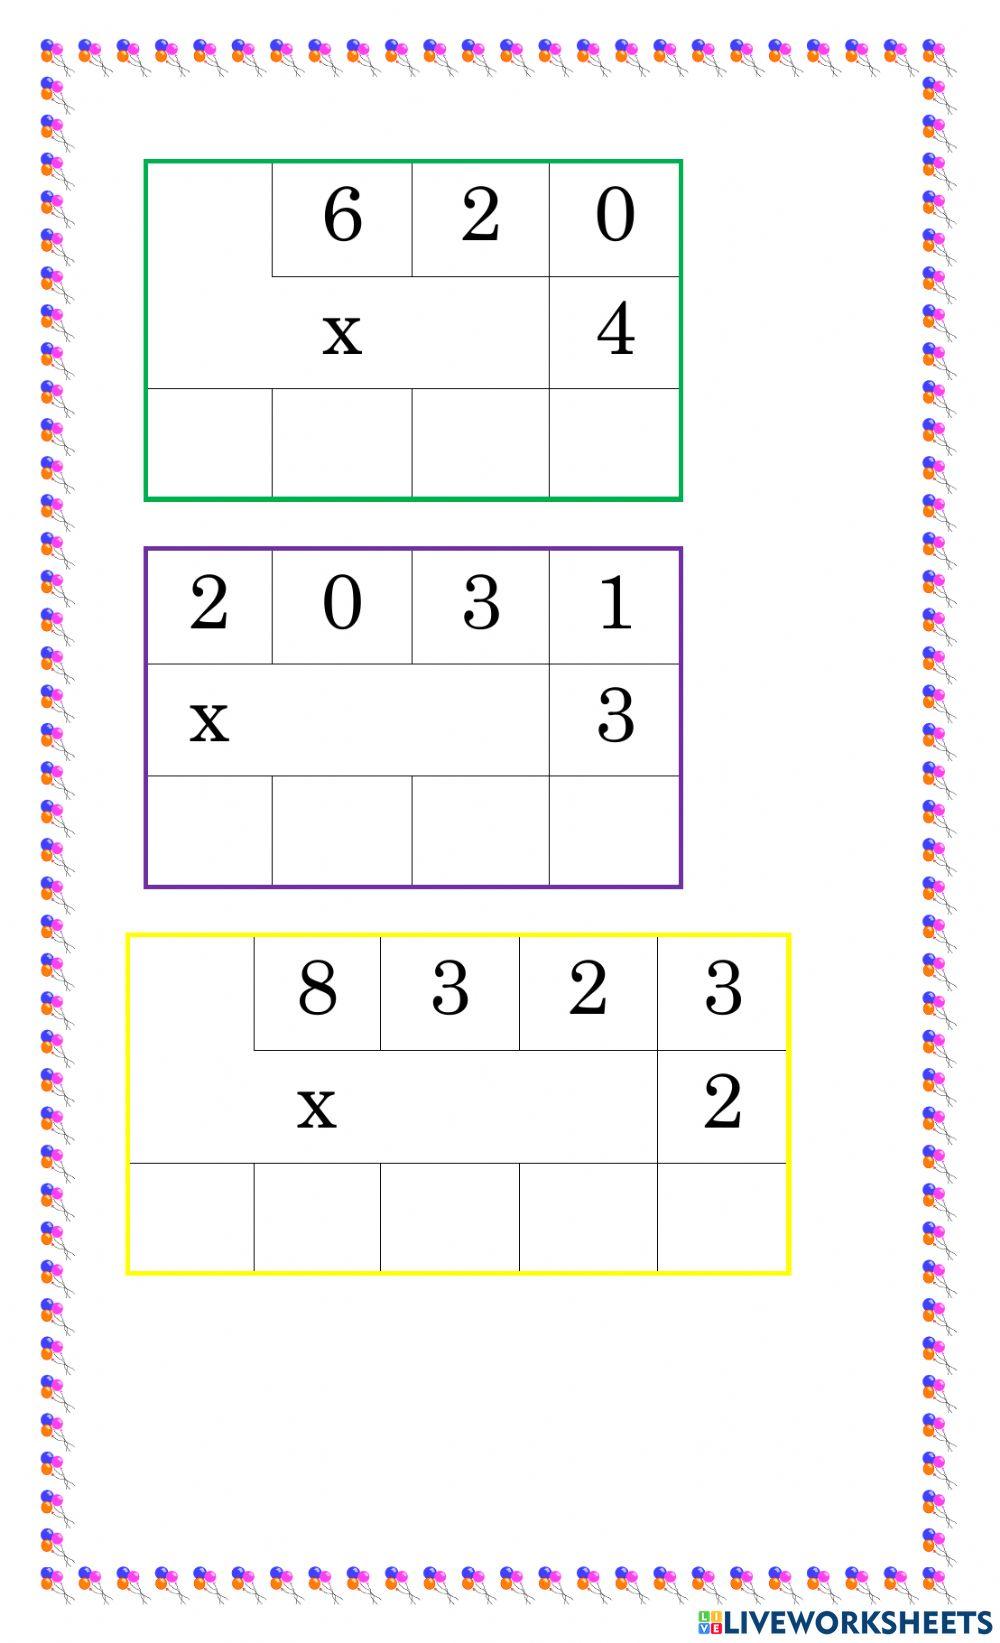 Multiplication without Regrouping